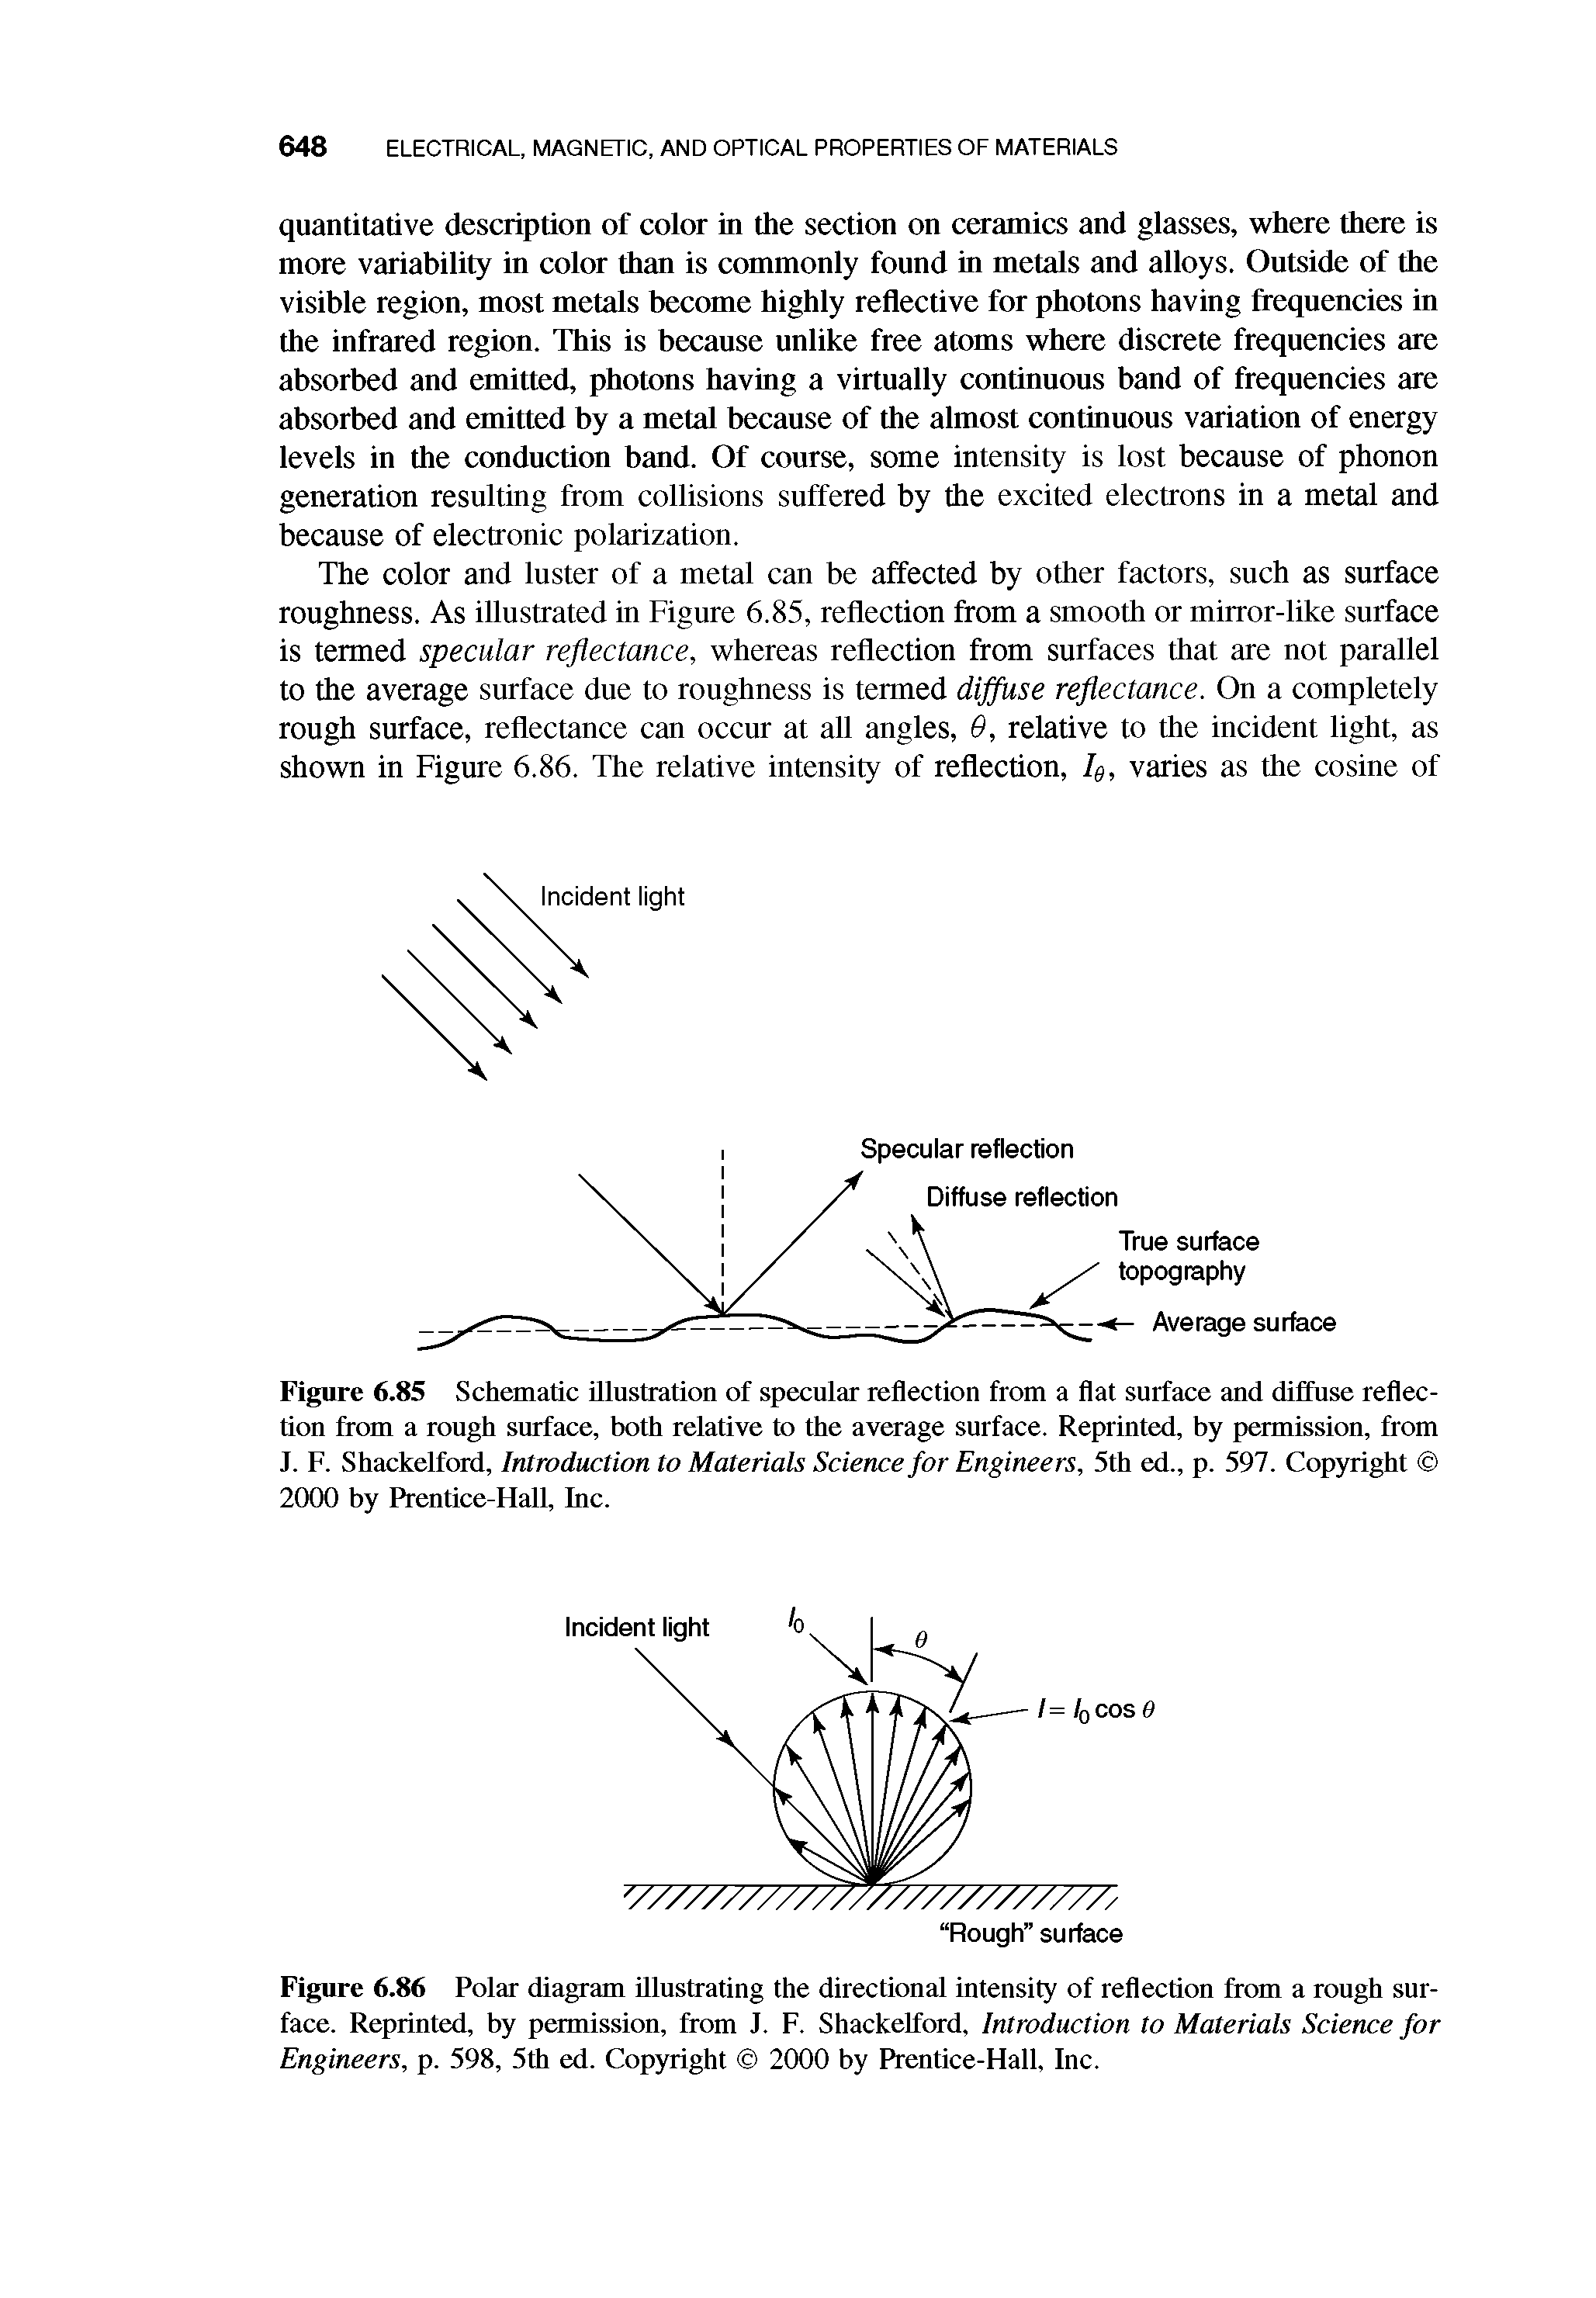 Figure 6.86 Polar diagram illustrating the directional intensity of reflection from a rough surface. Reprinted, by permission, from J. F. Shackelford, Introduction to Materials Science for Engineers, p. 598, 5th ed. Copyright 2000 by Prentice-Hall, Inc.